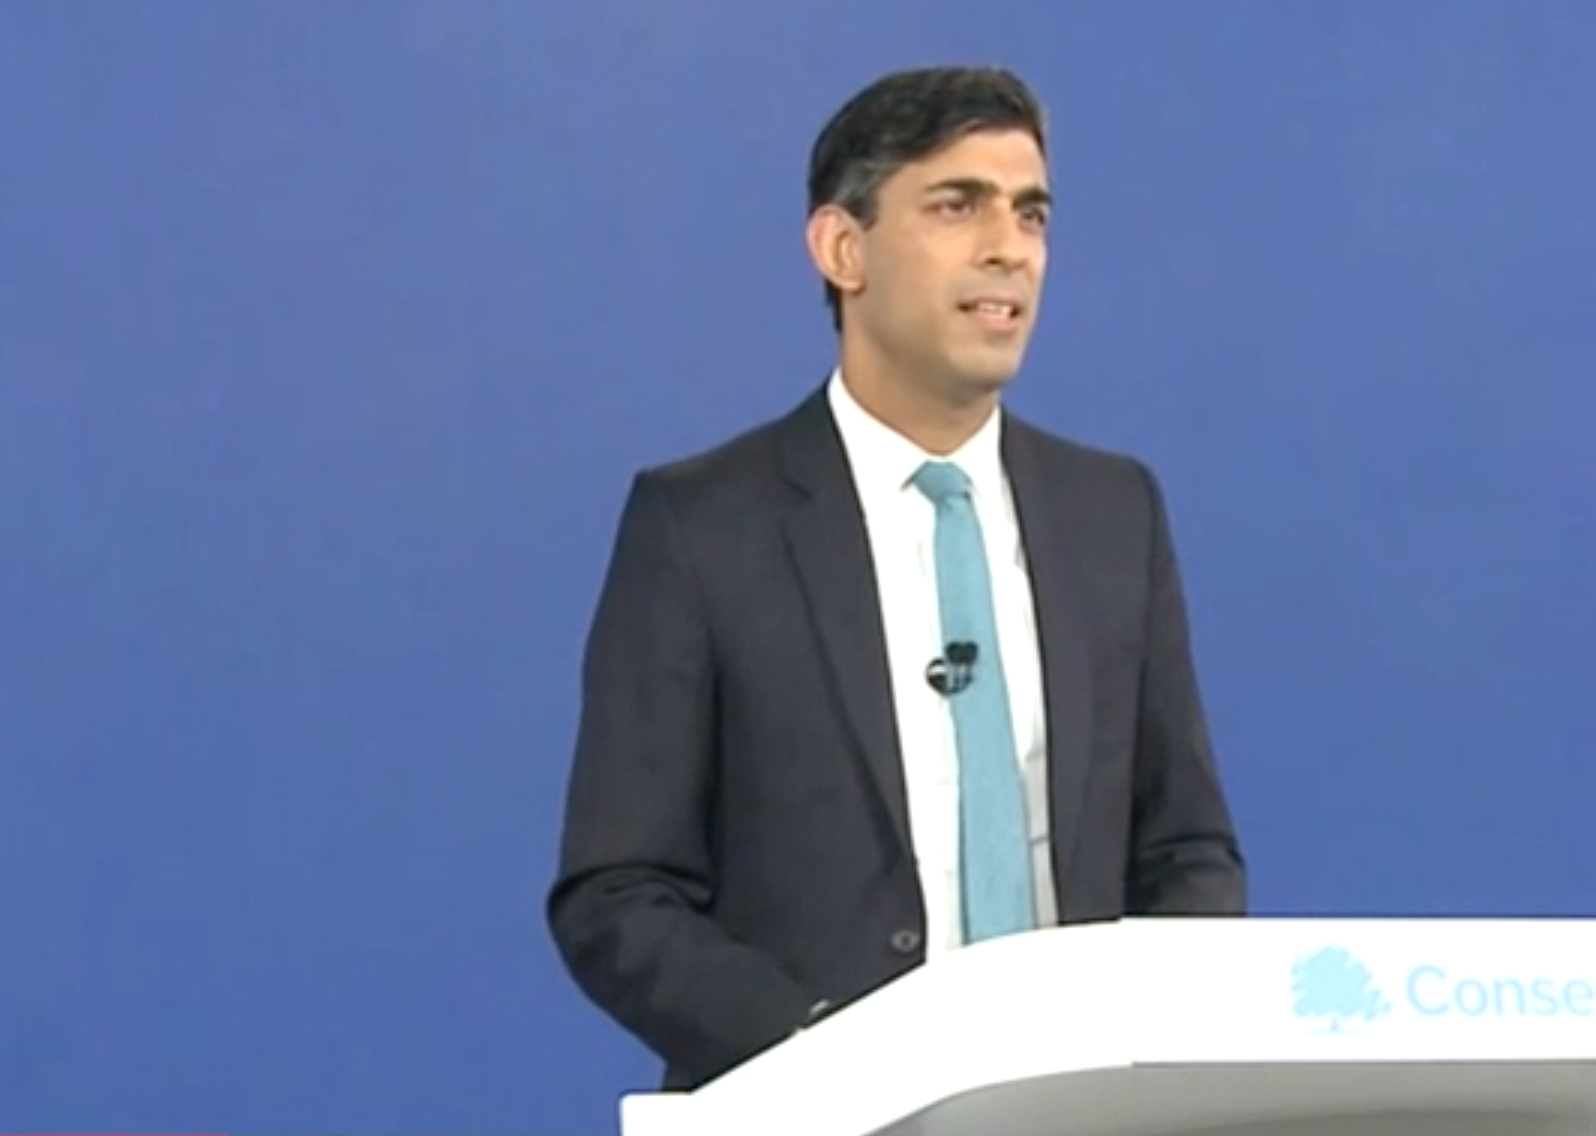 Speaking at virtual Tory conference on Monday